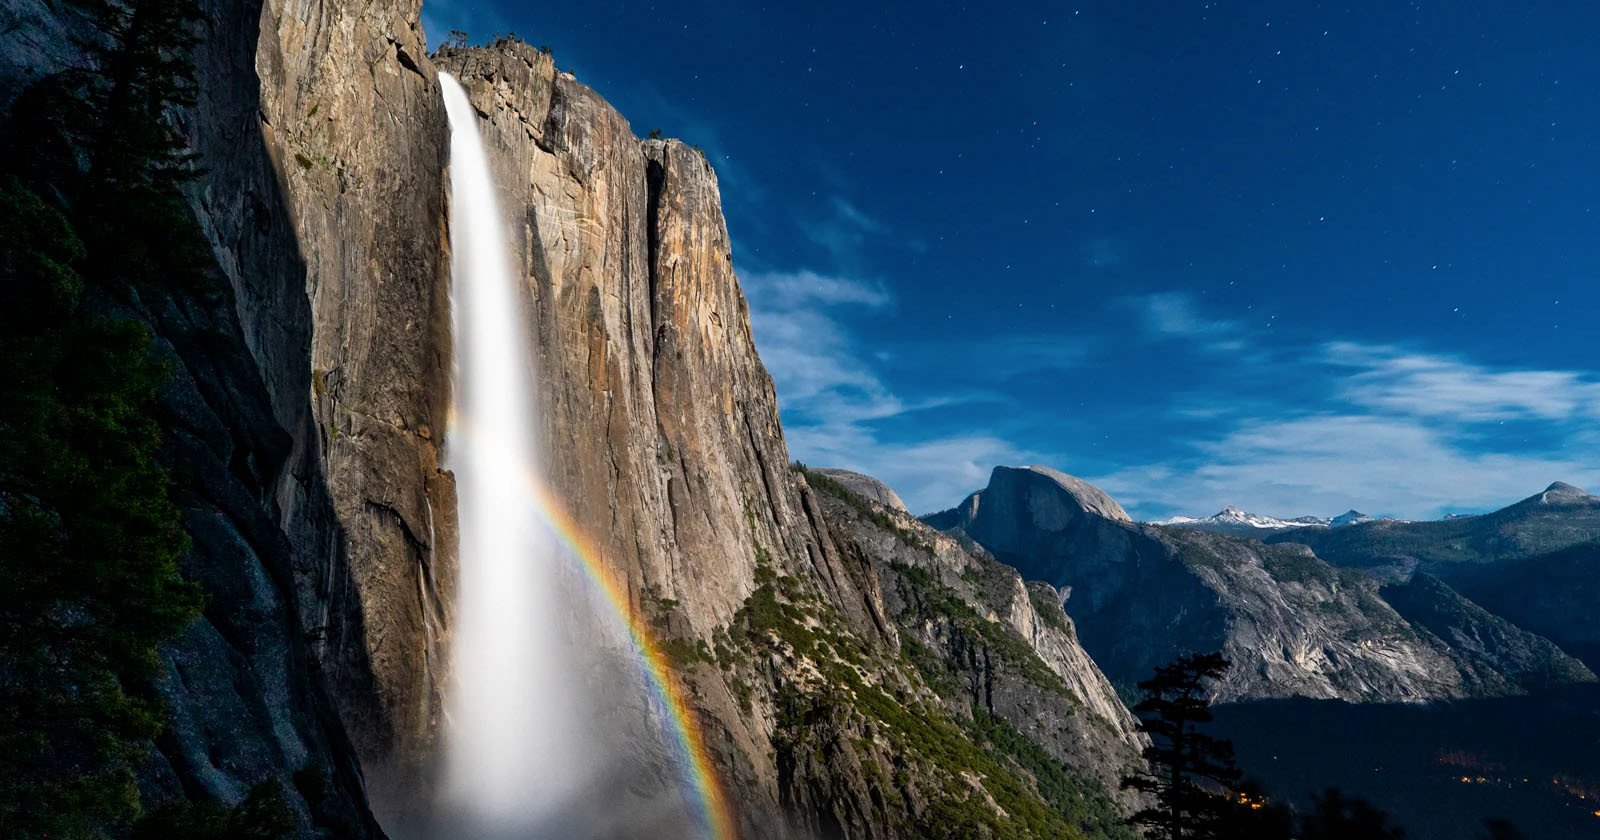 Photographing Moonbows at Night in Yosemite National Park